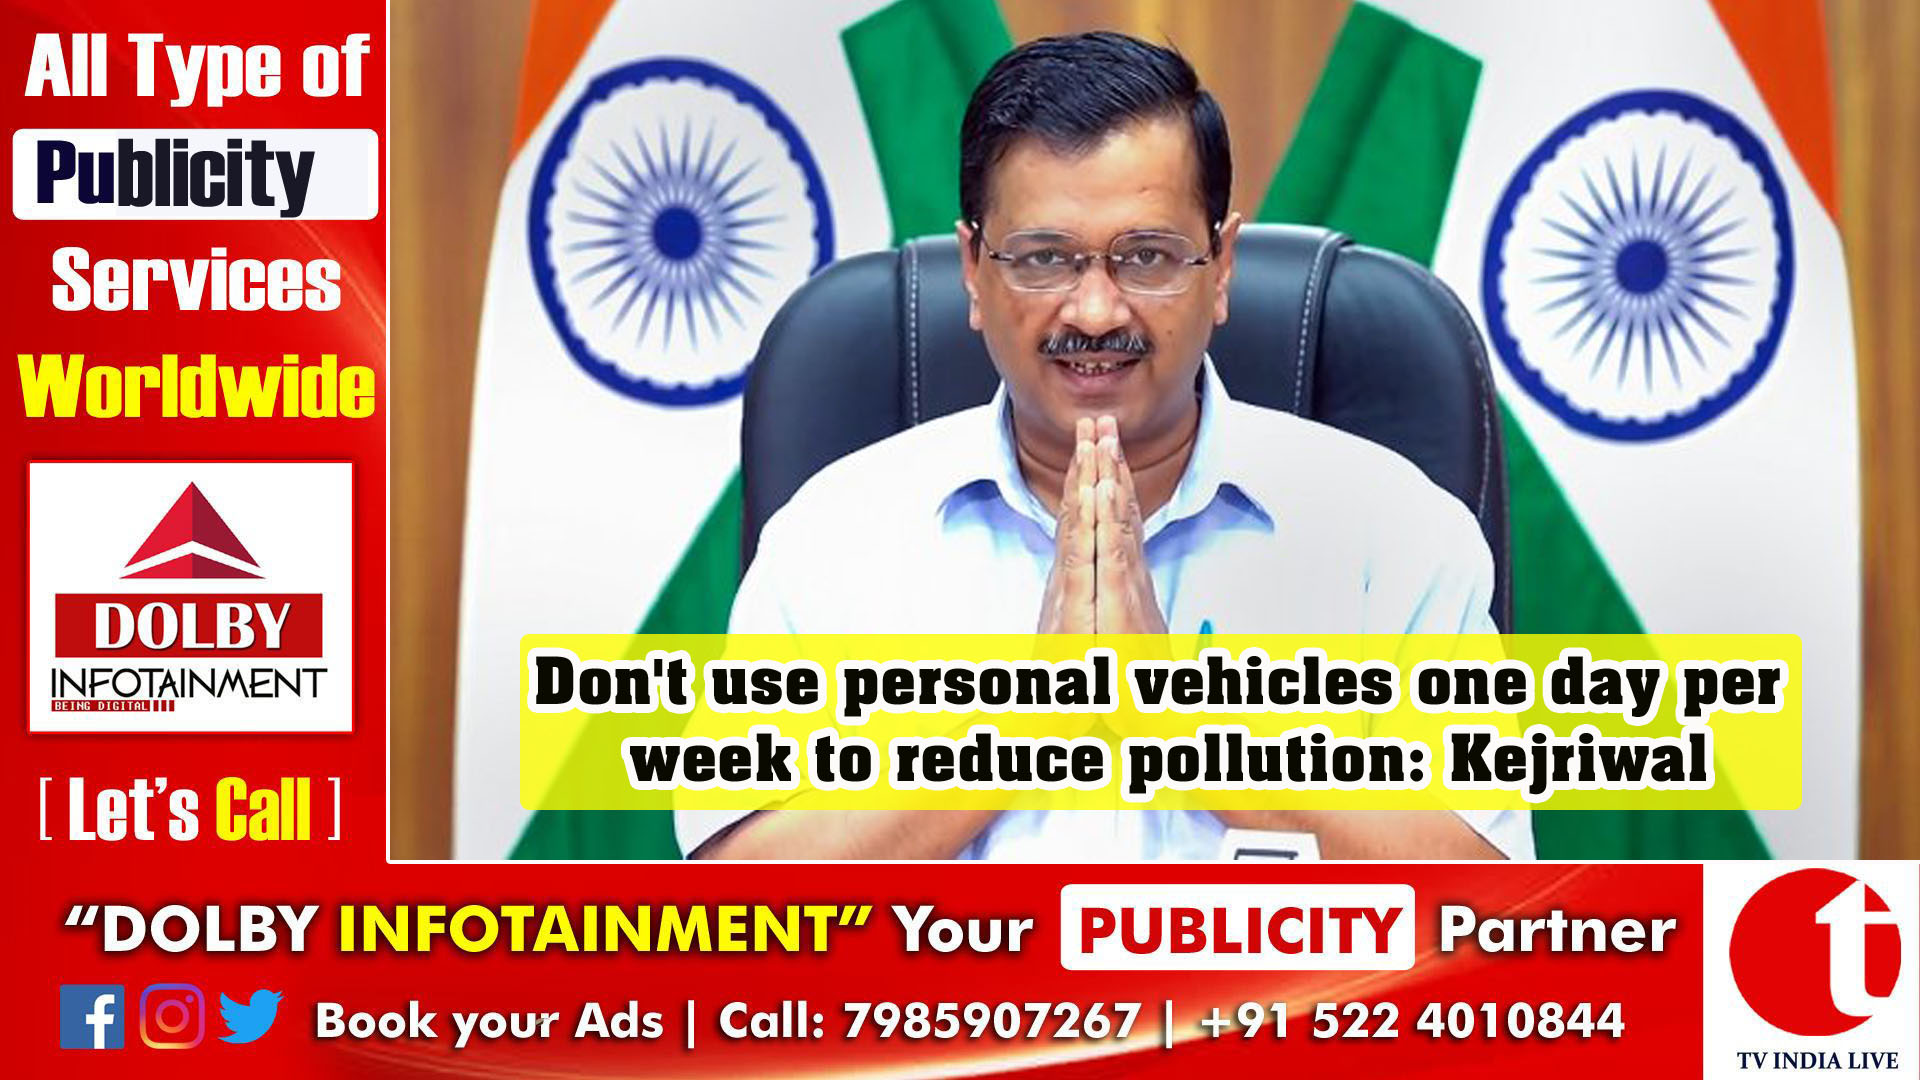 Don't use personal vehicles one day per week to reduce pollution: Kejriwal